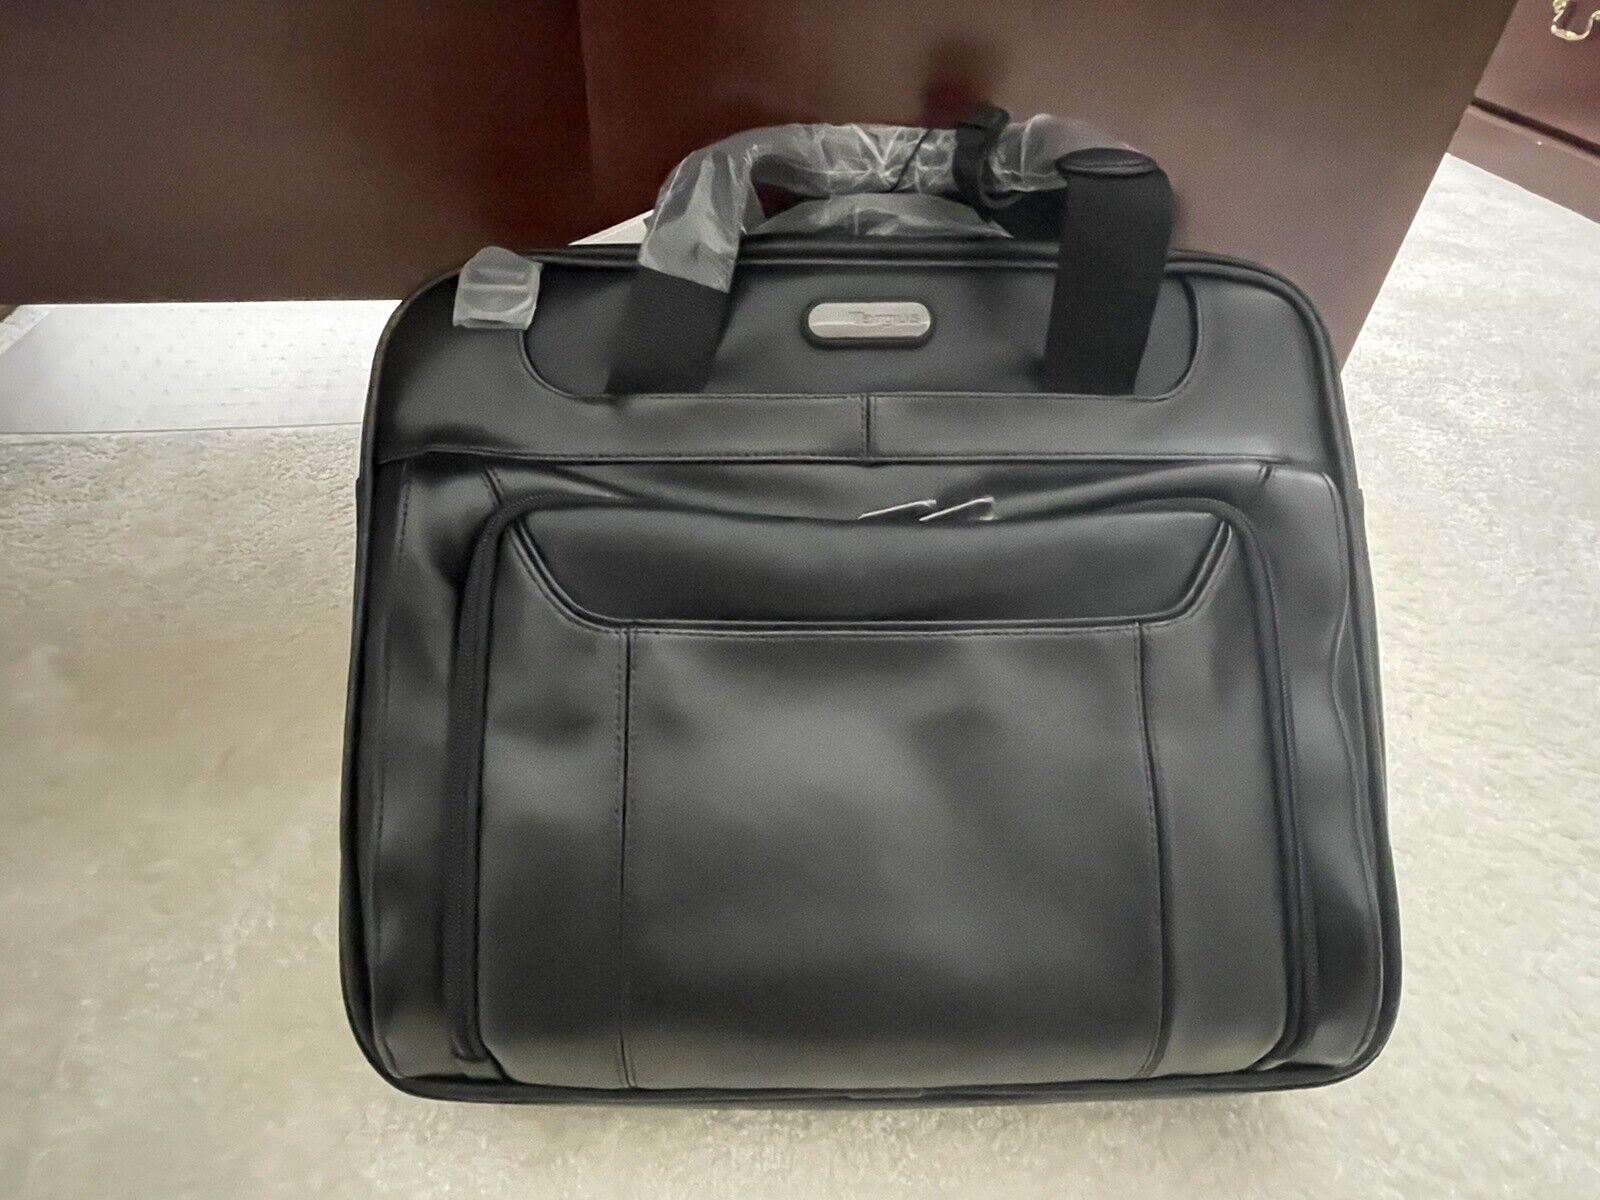 Targus Corporate Traveler Leather Laptop Case 14” W/ Defcon KL Cable Lock -NEW-